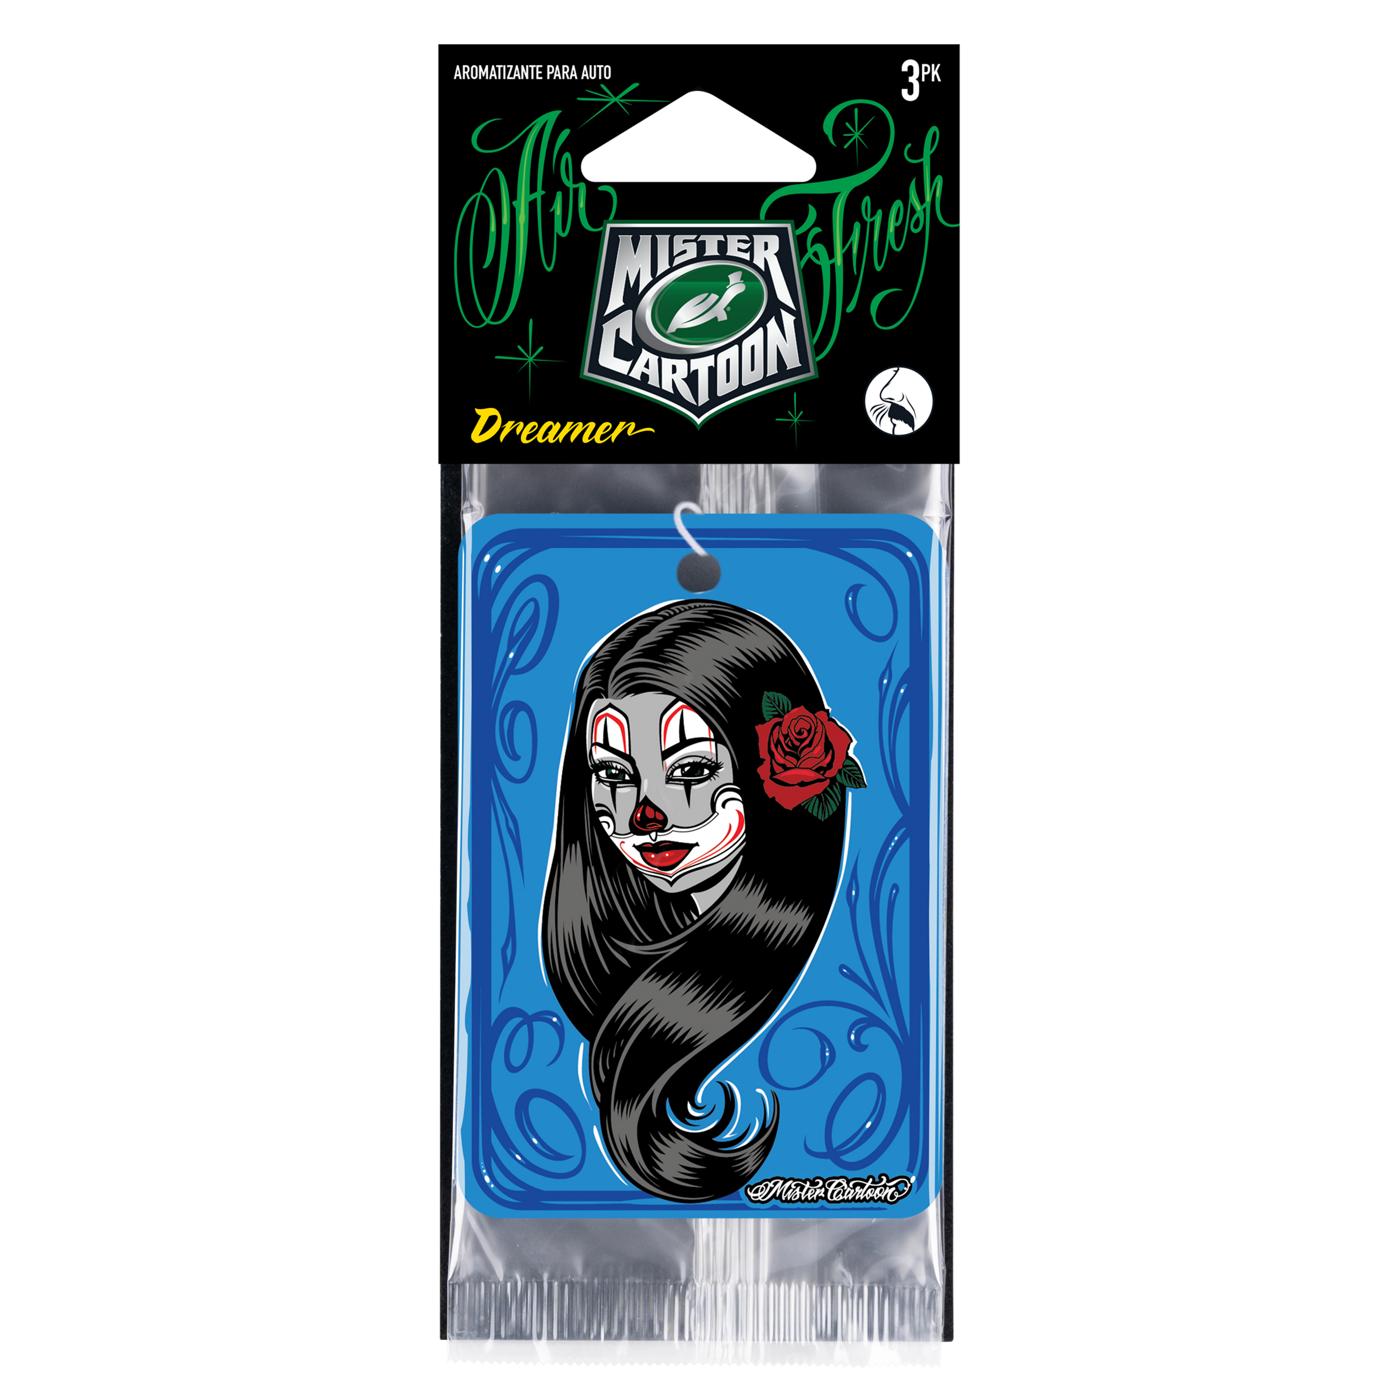 Turtle Wax Mister Cartoon Paper Air Fresheners - Dreamer; image 1 of 2